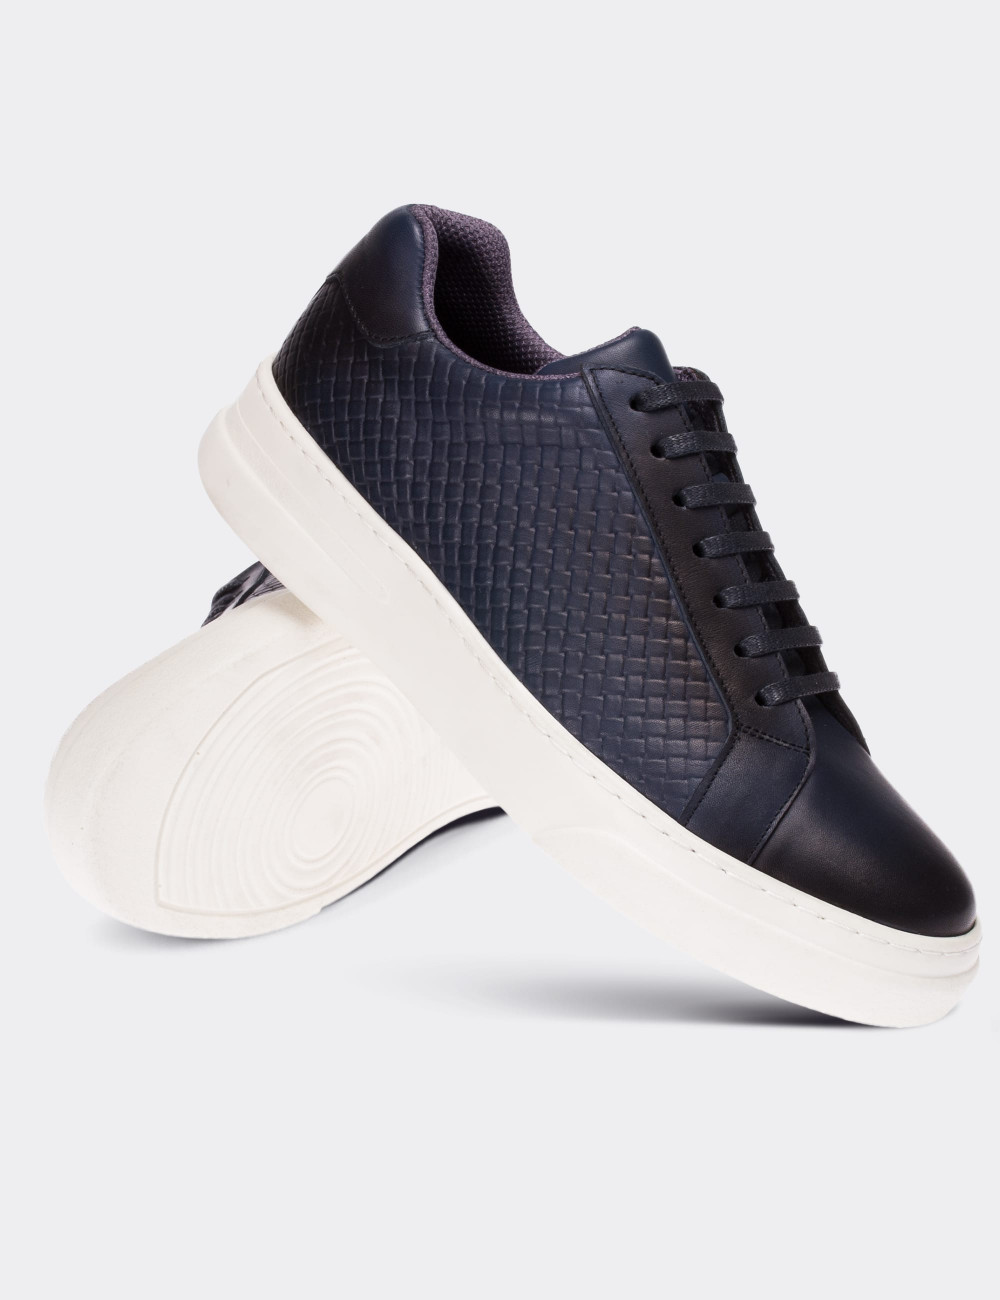 Navy  Leather Sneakers - 01737MLCVP01